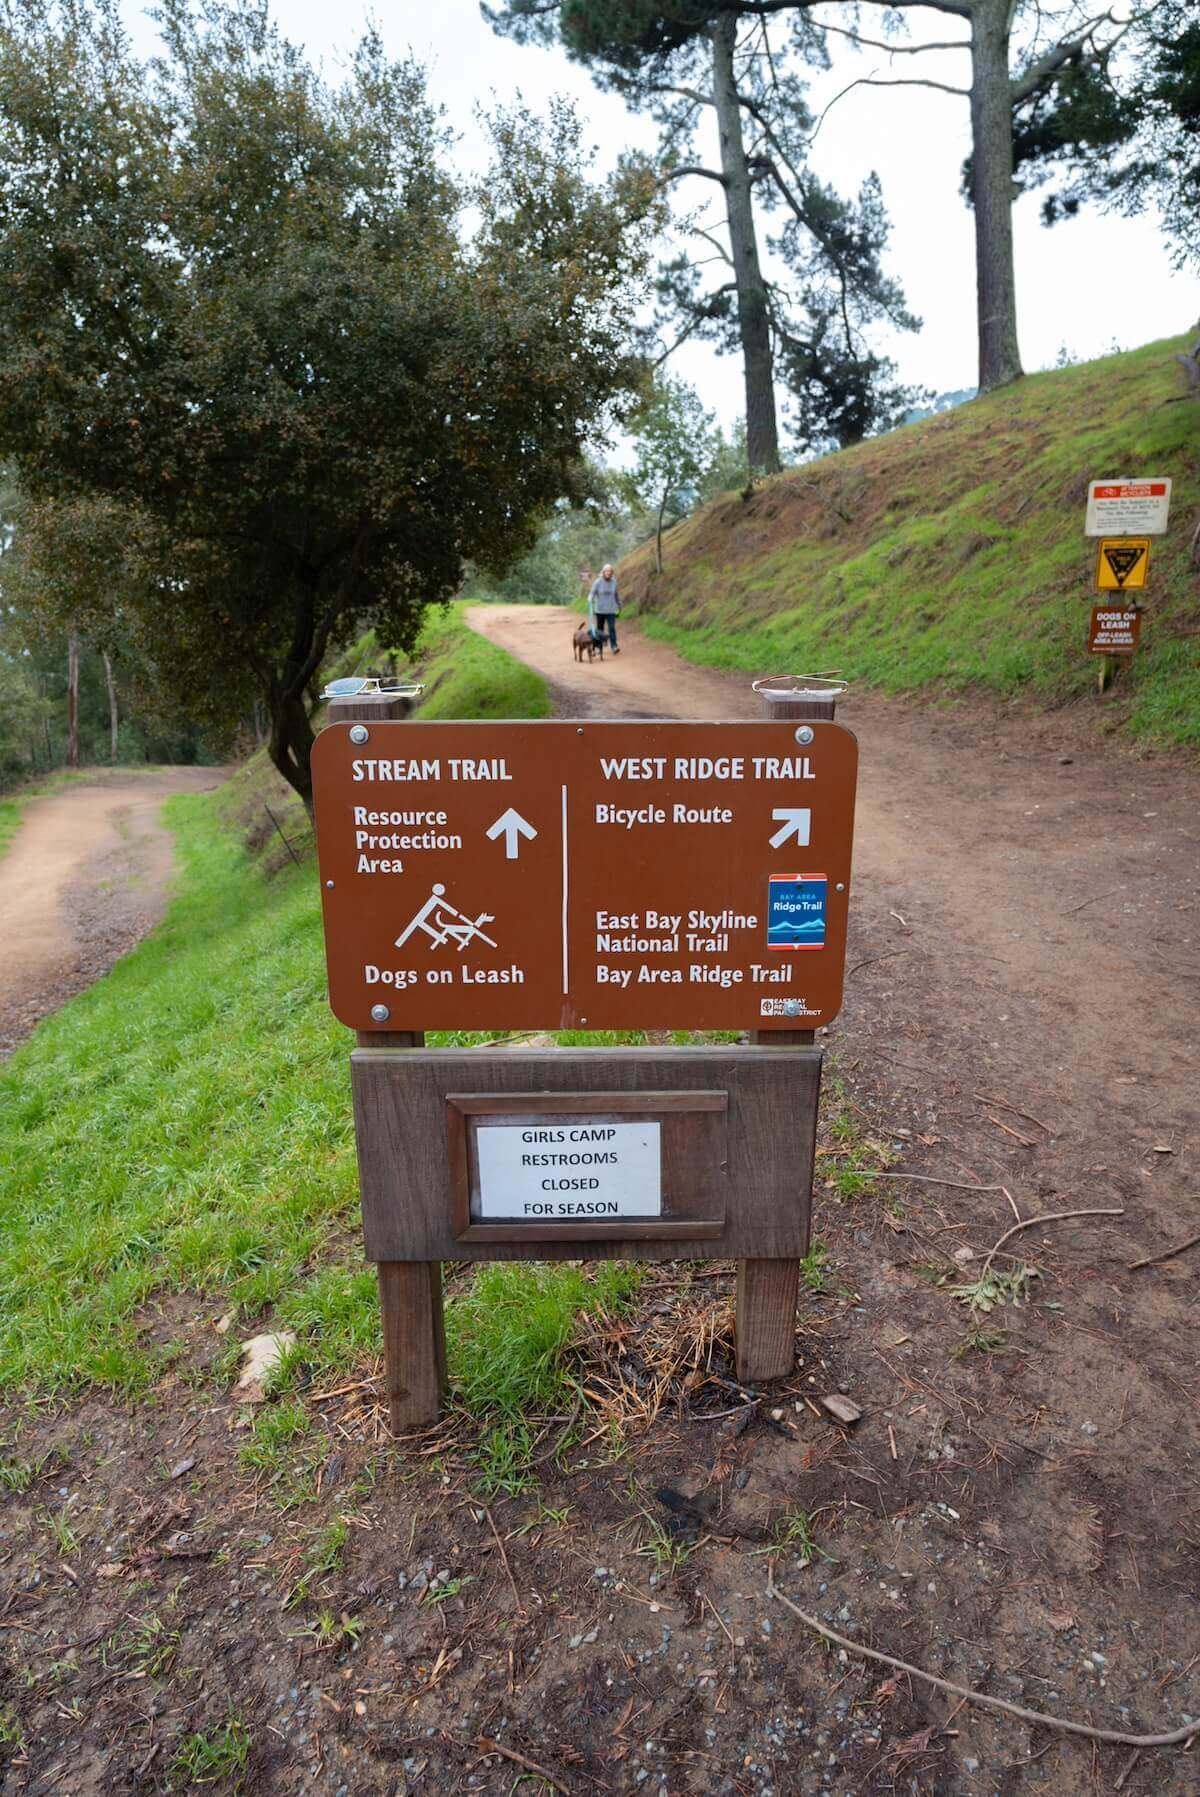 A brown trailhead sign posted at a fork in a dirt path at Reinhardt Redwood Regional Park.